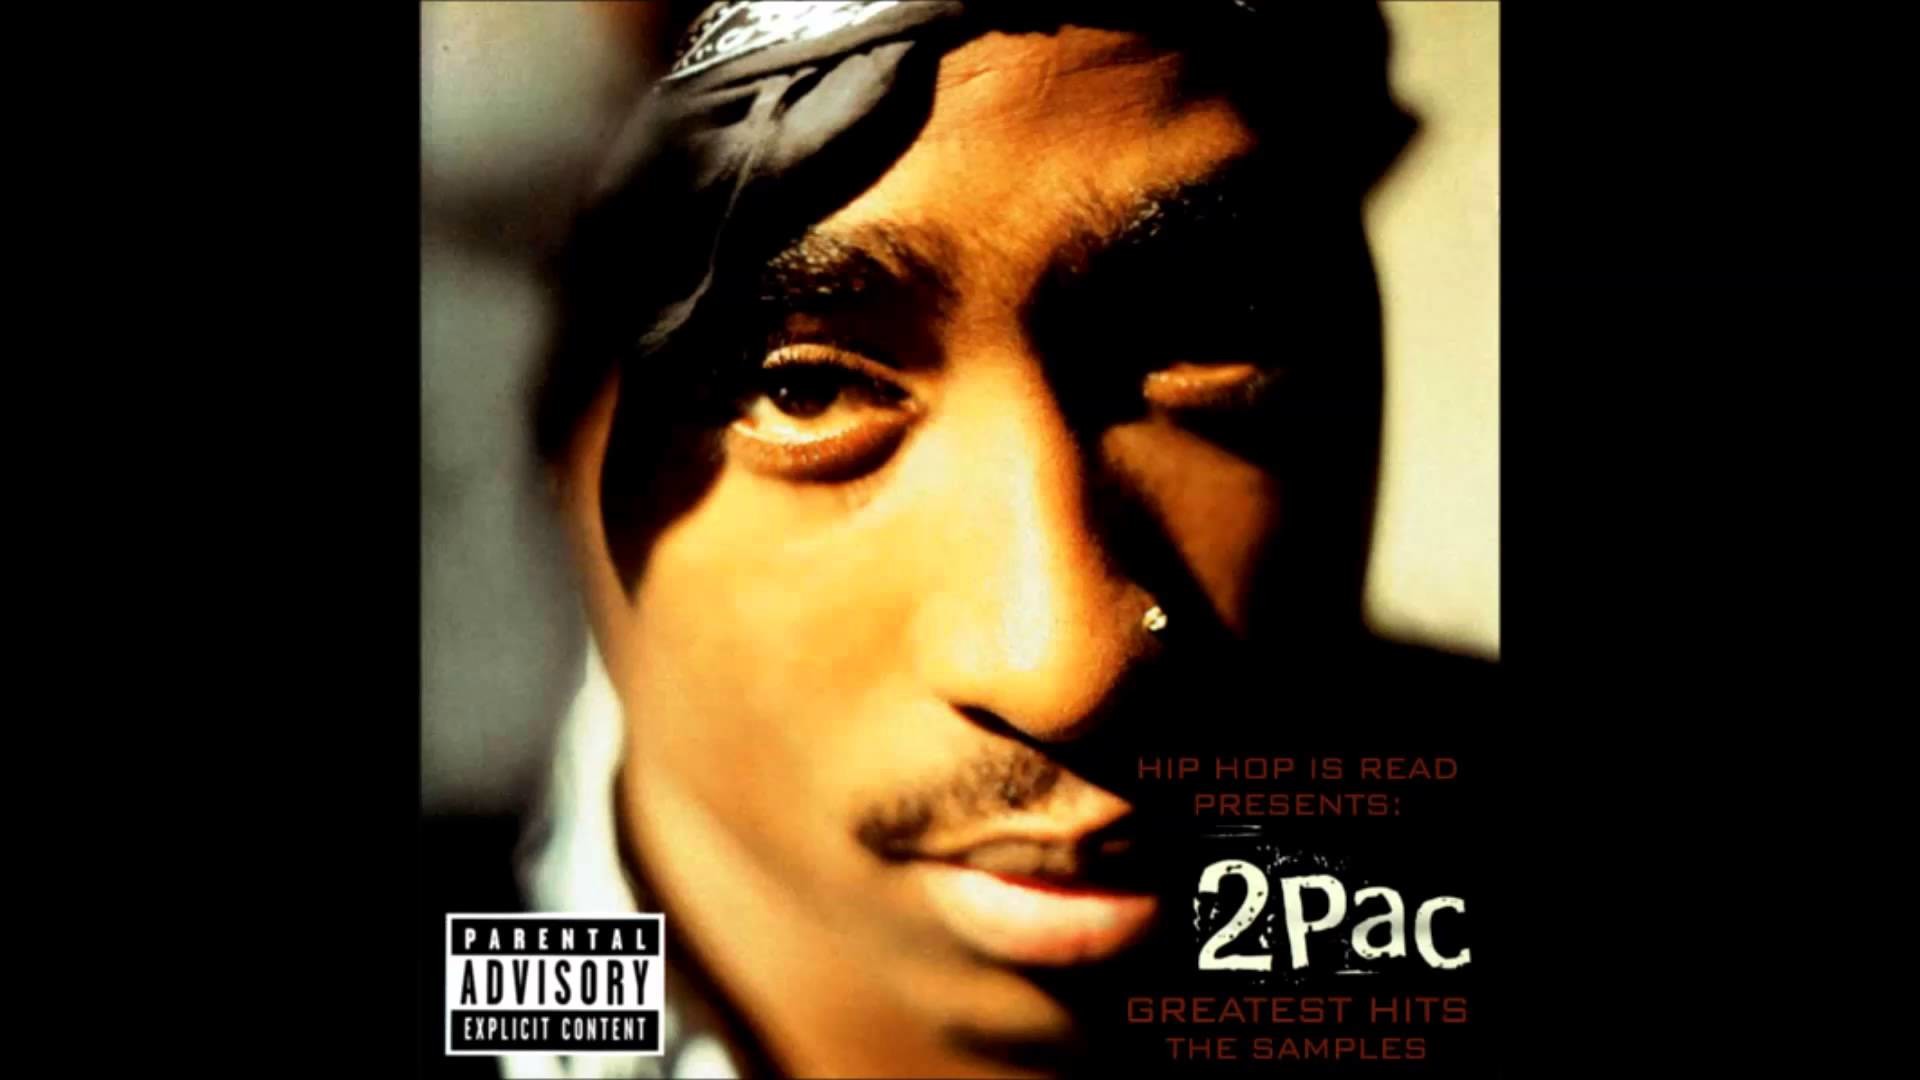 1920x1080 2 Pac Greatest Hits Disc 2 - 01 Troublesome 96' [#]